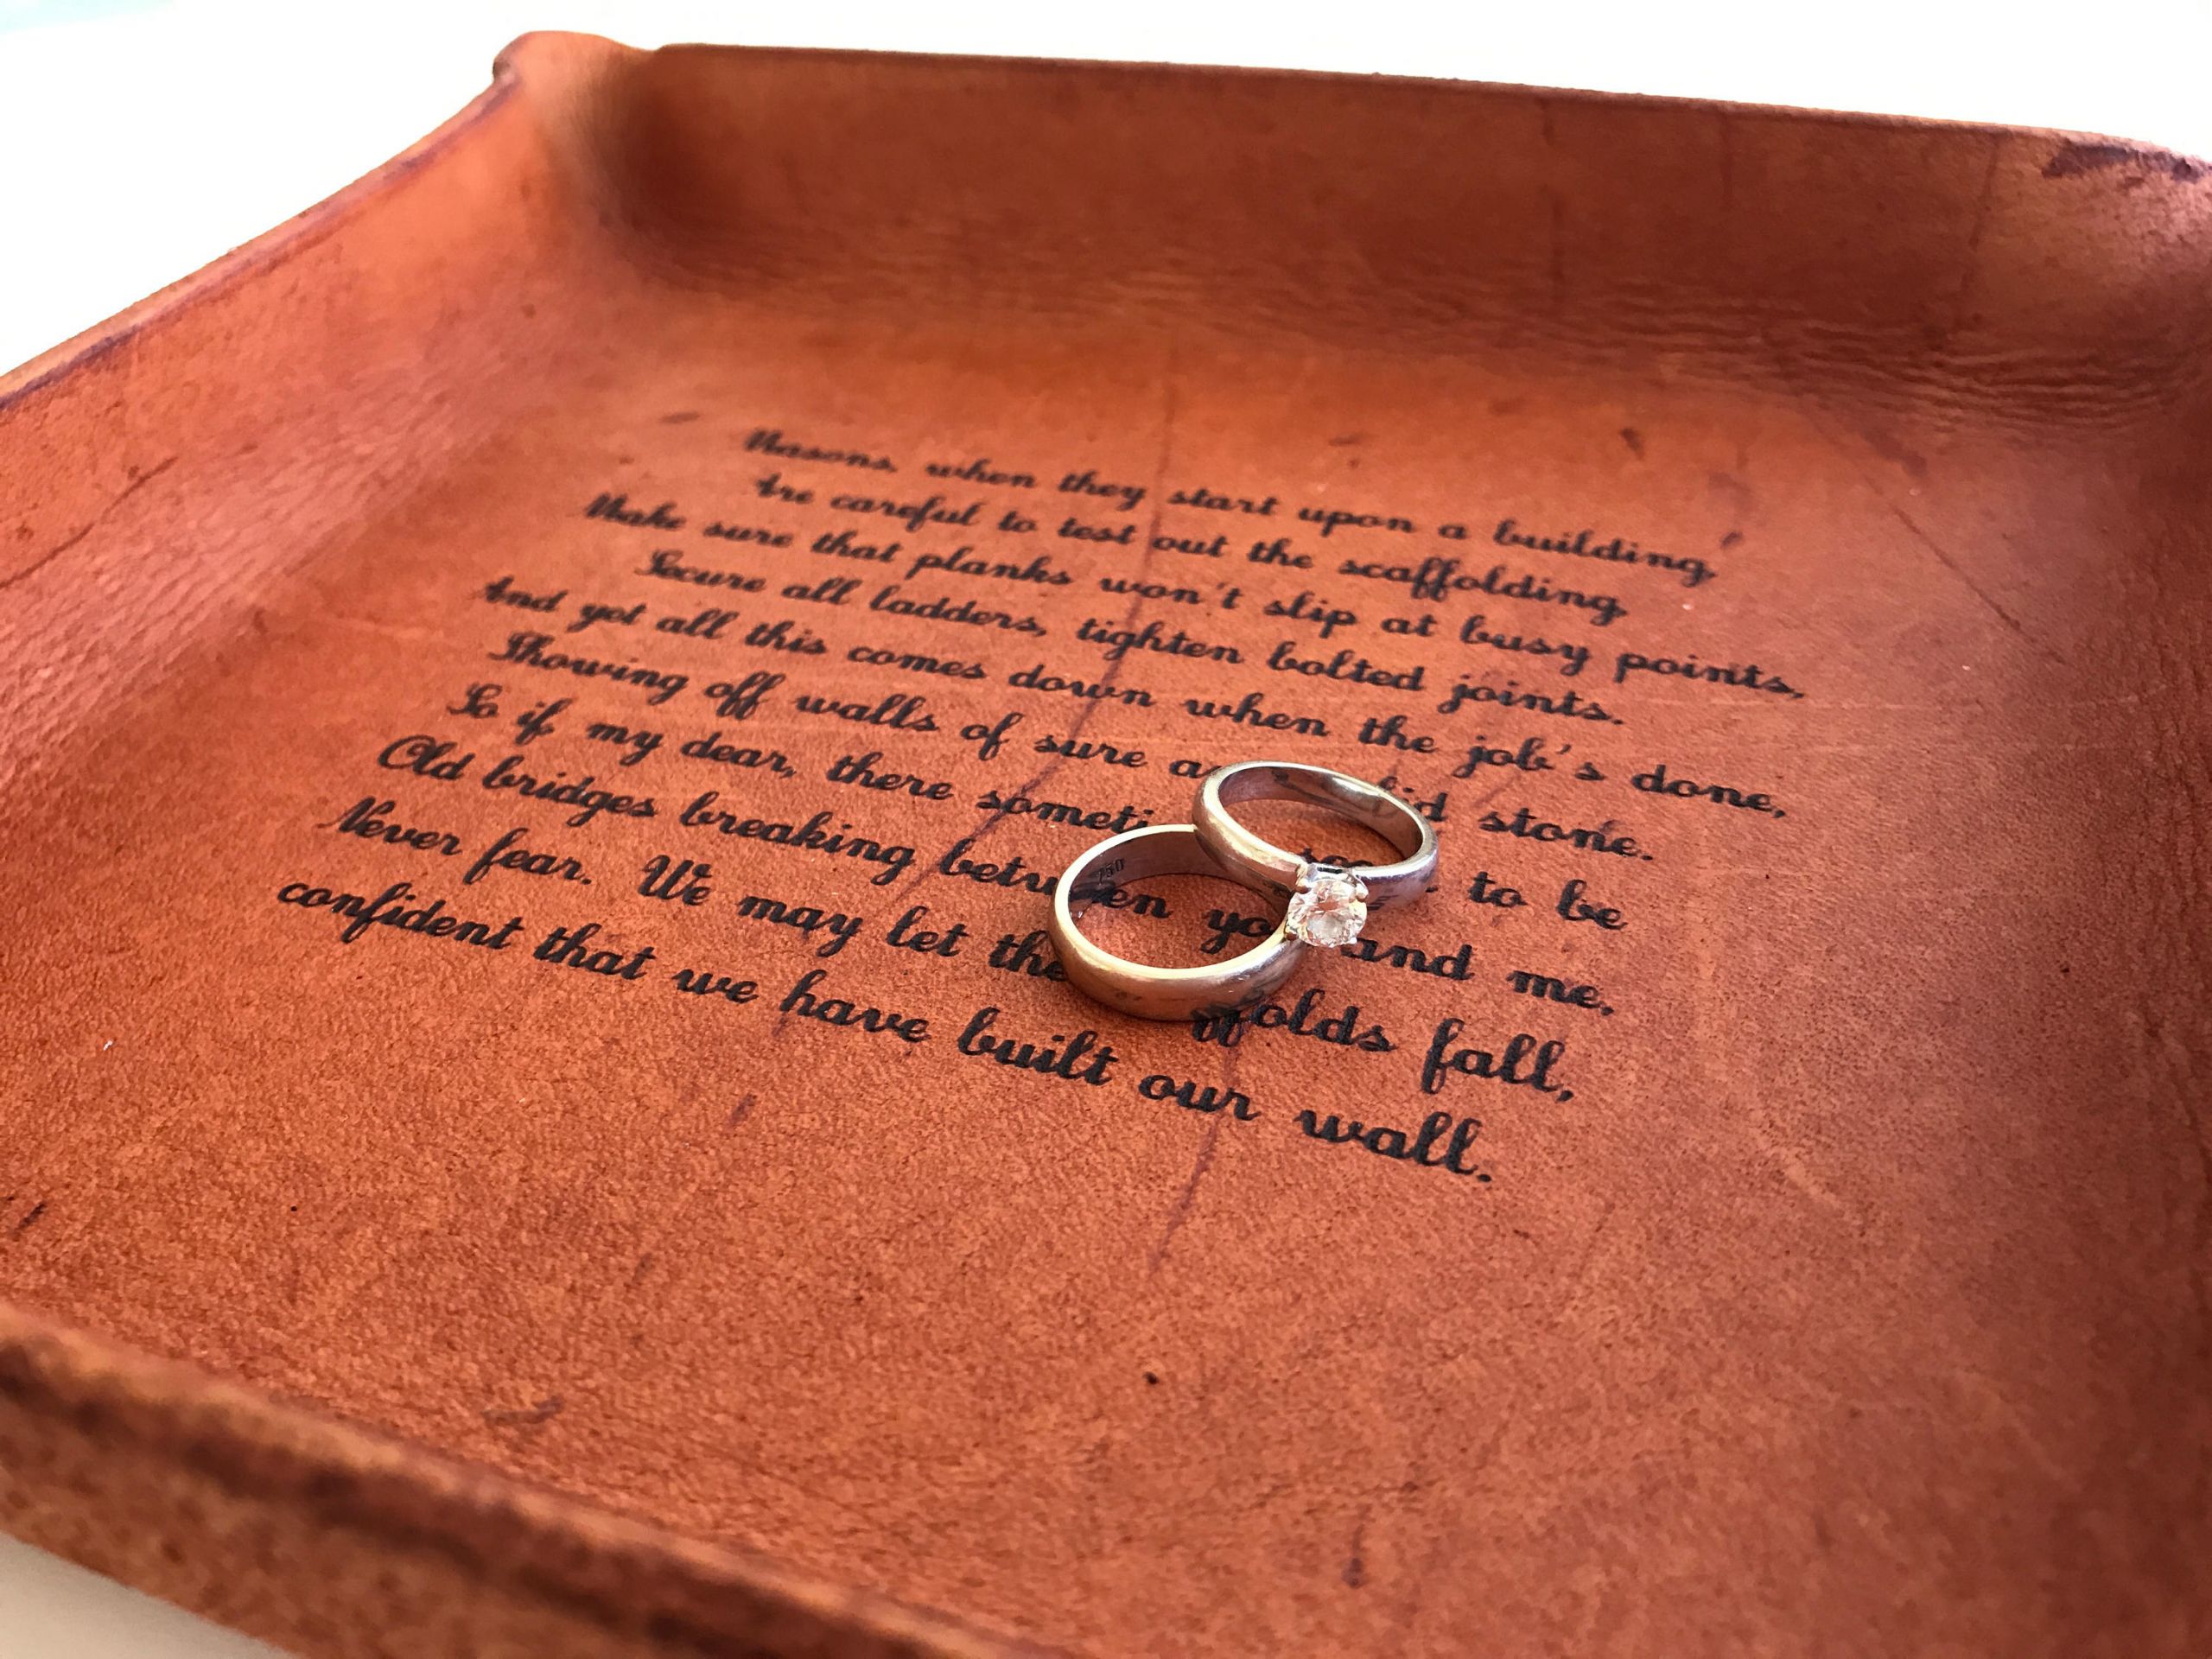 3 Years Anniversary Gift Ideas
 Leather Tray with Your Vows 3 Year Anniversary Gift